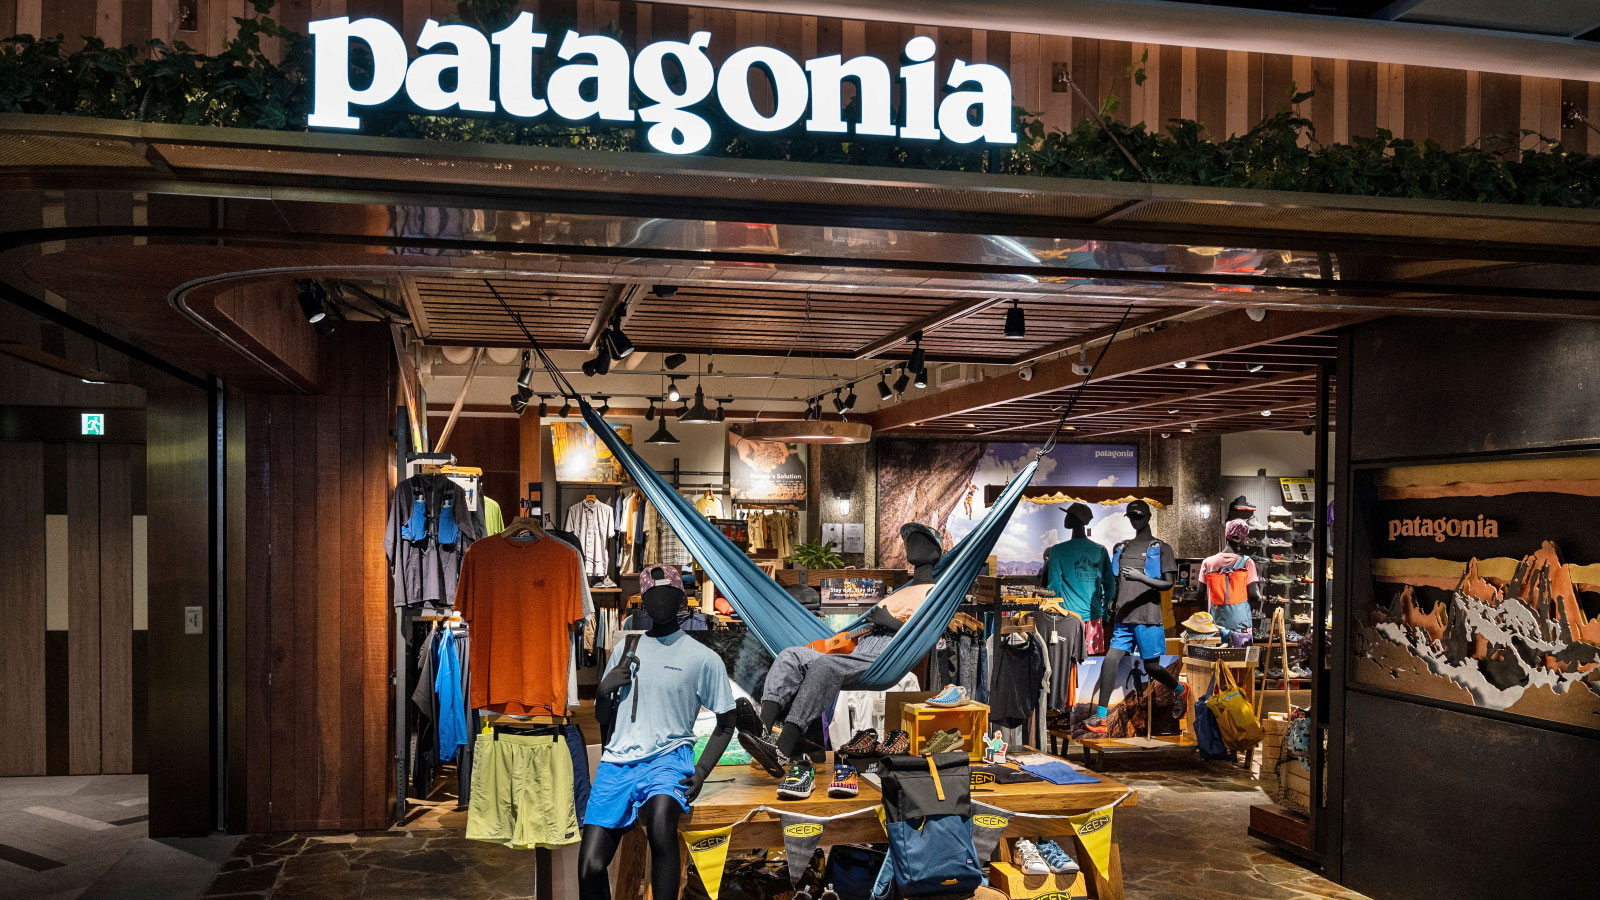 A Patagonia storefront featuring mannequins sitting and lounging in a hammock amongst clothing and gear displays